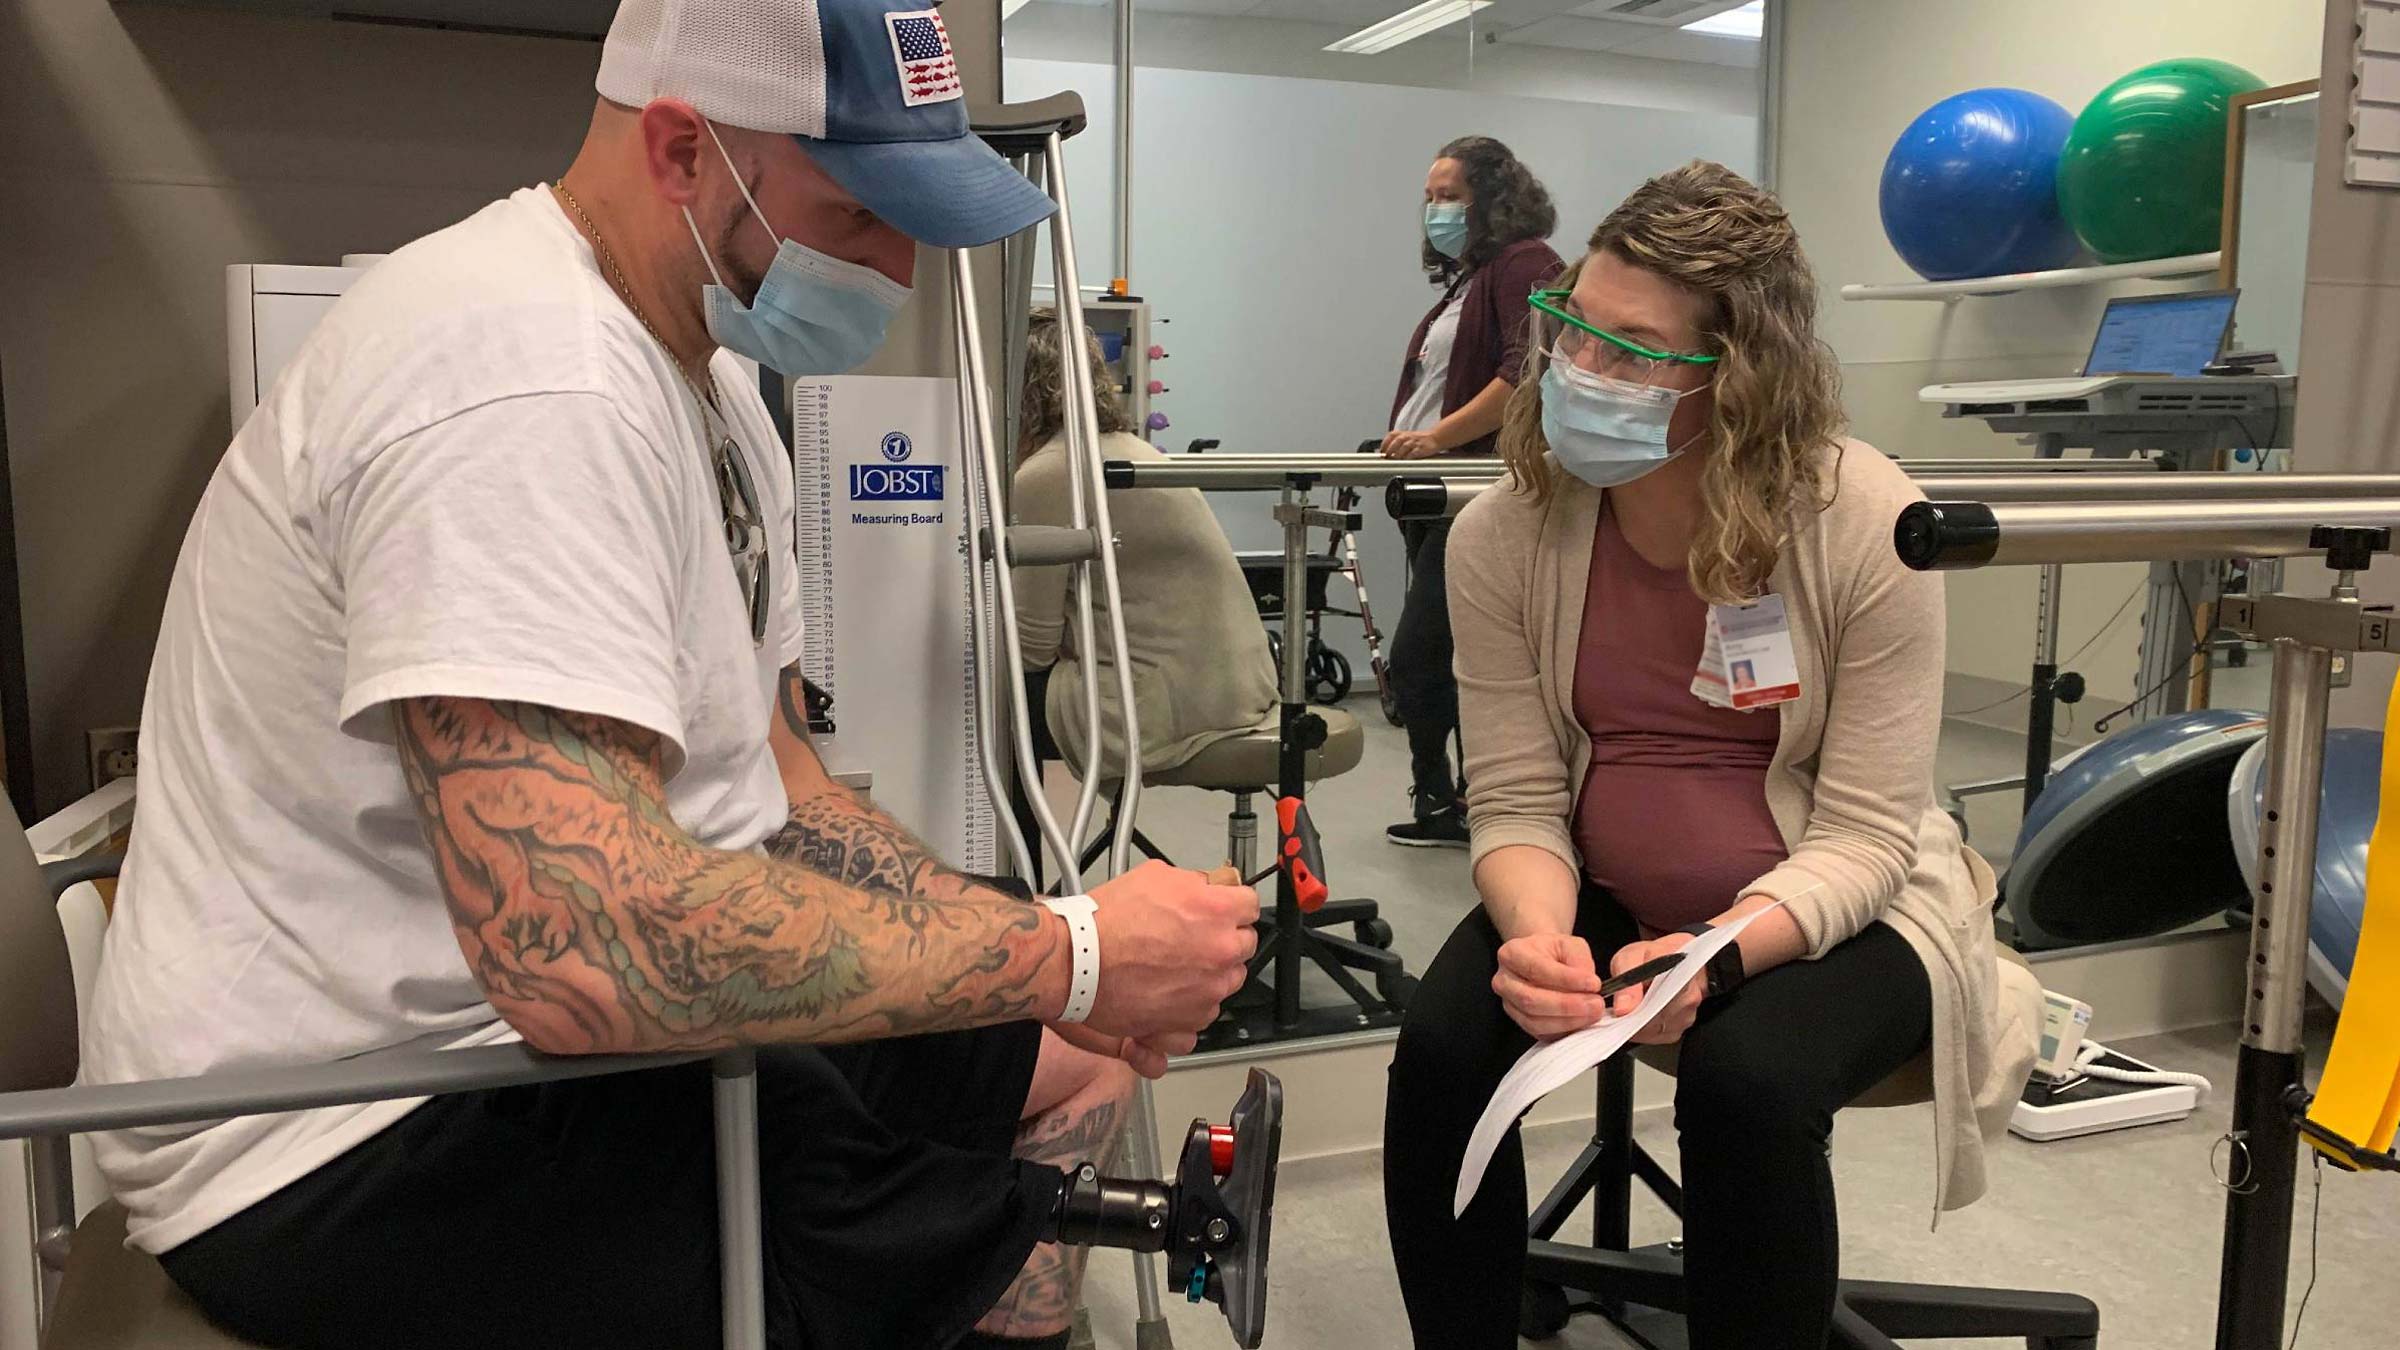 Broc Potts works with physical therapist Amy Compston at OSUCCC – James to learn how to snap on his new prosthetic leg that attaches to a bar surgically implanted into his femur.